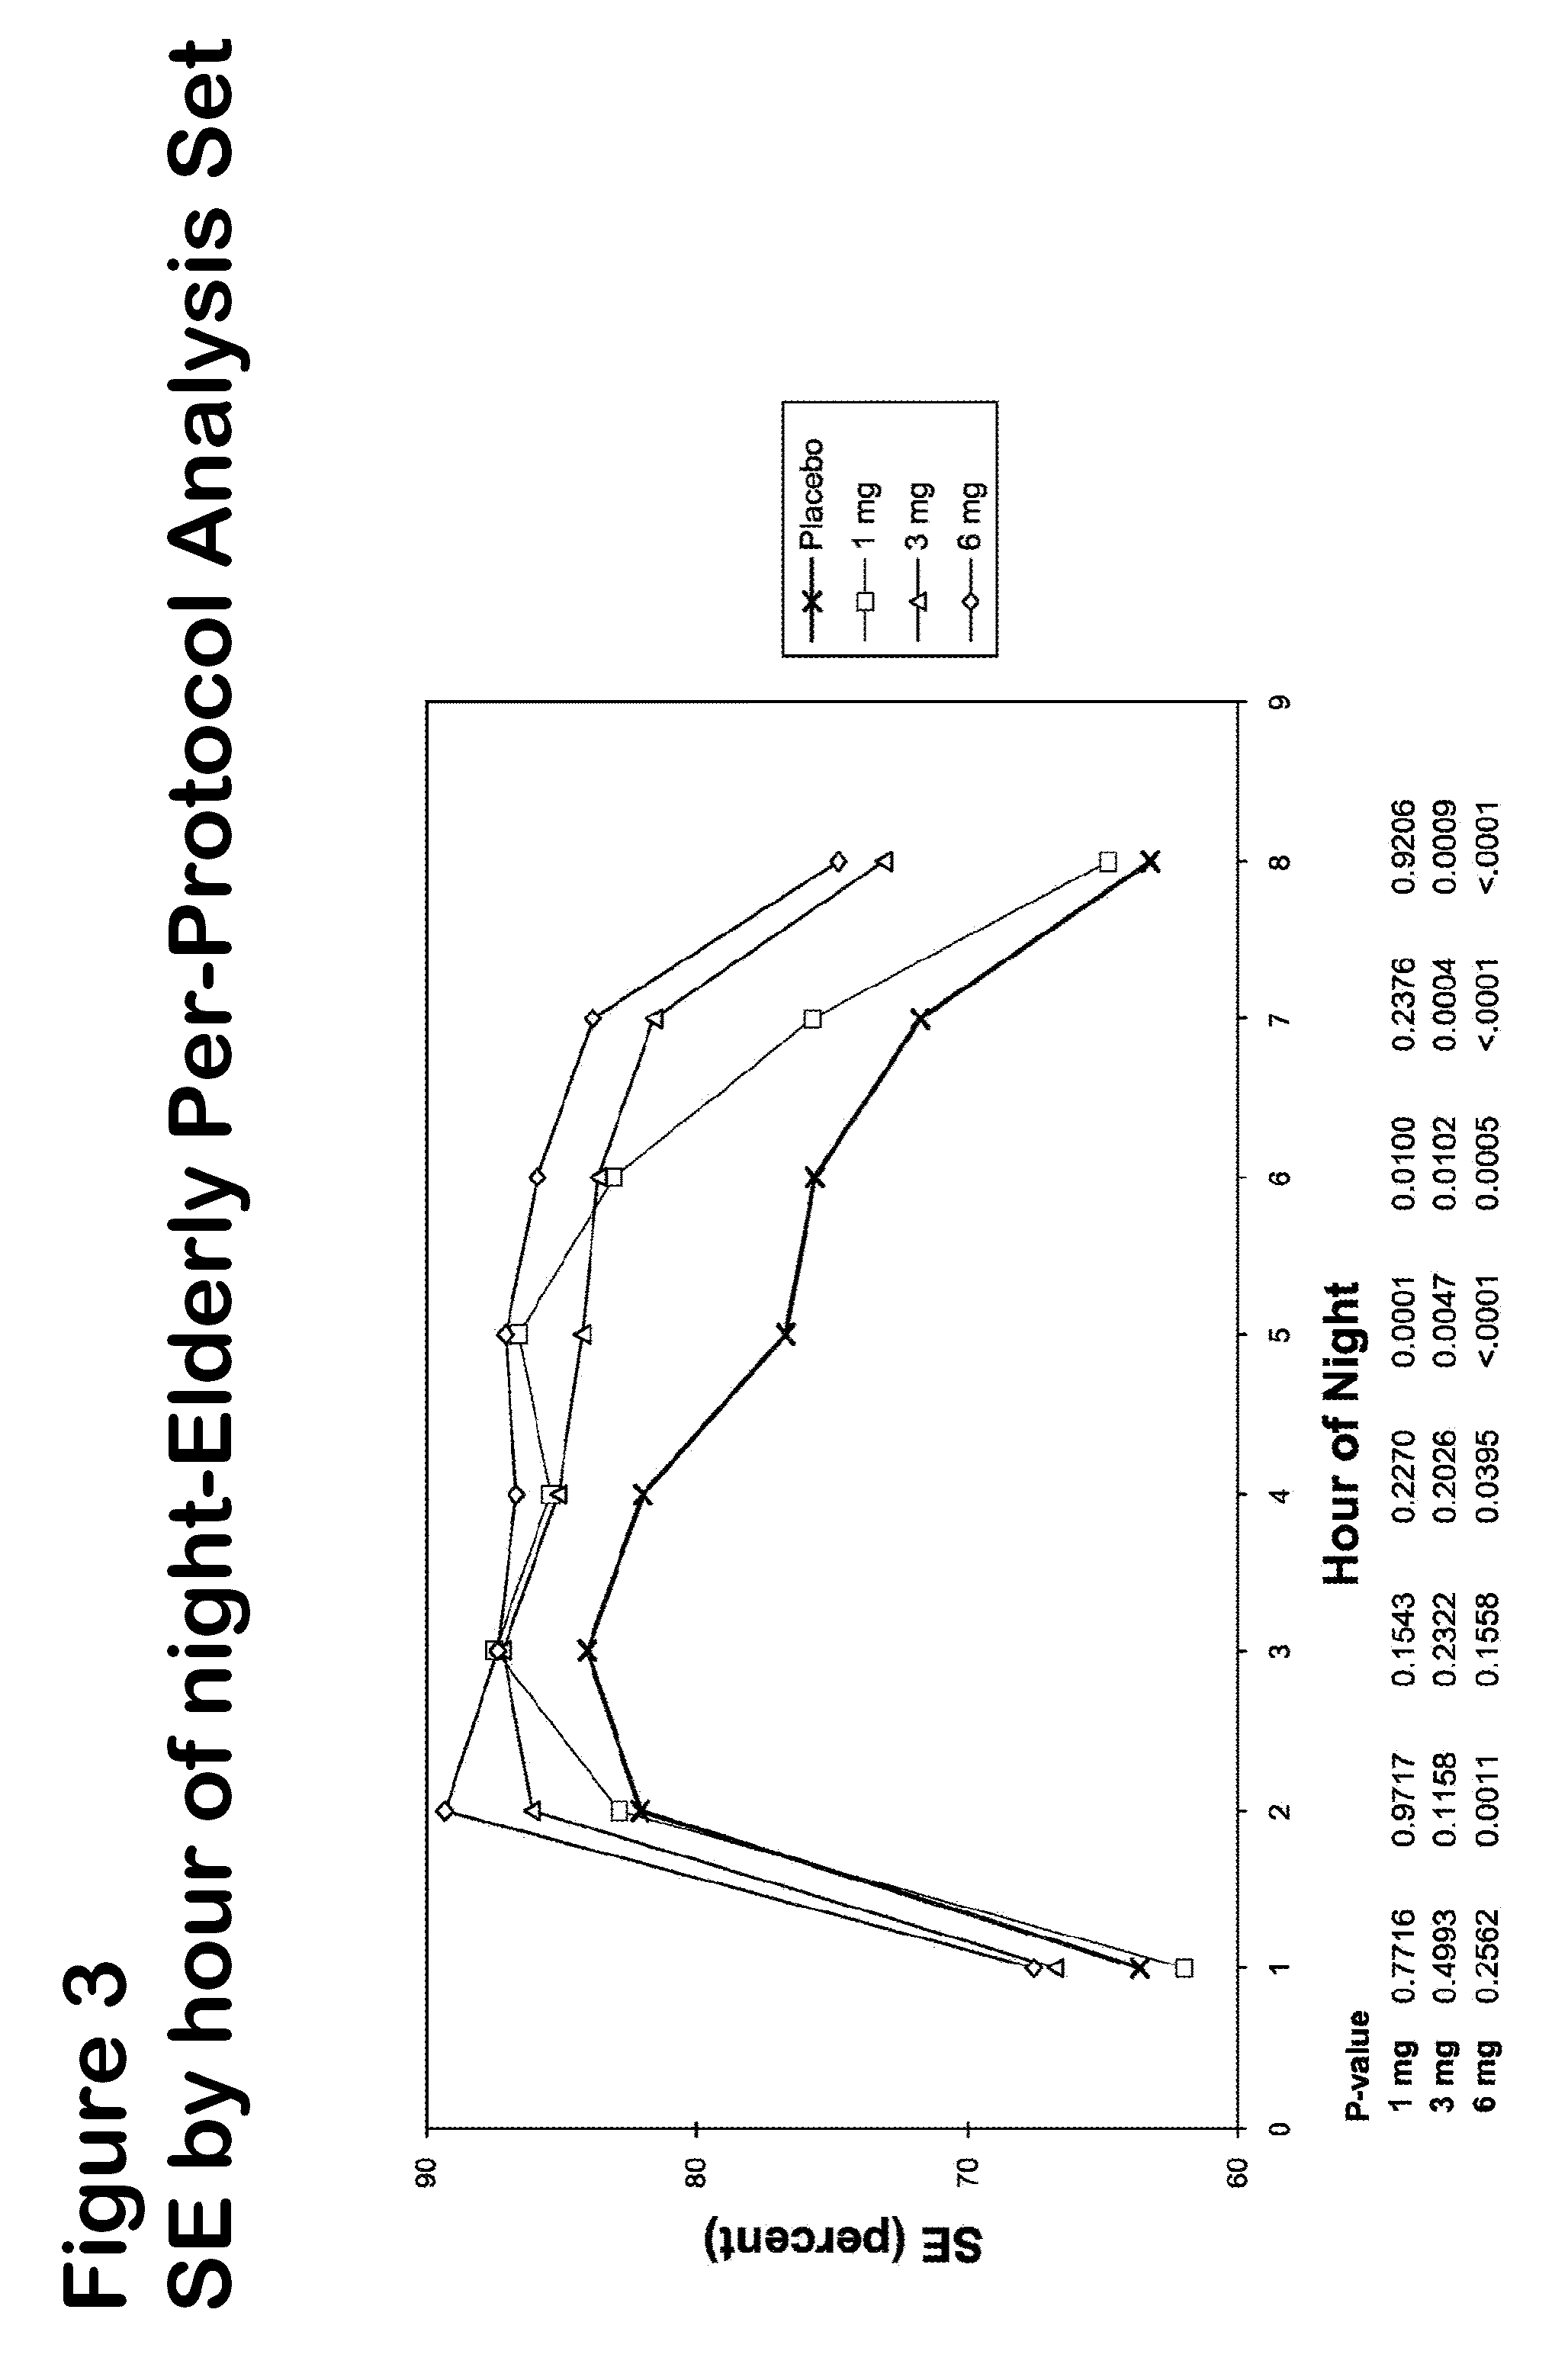 Method of using low-dose doxepin for the improvement of sleep